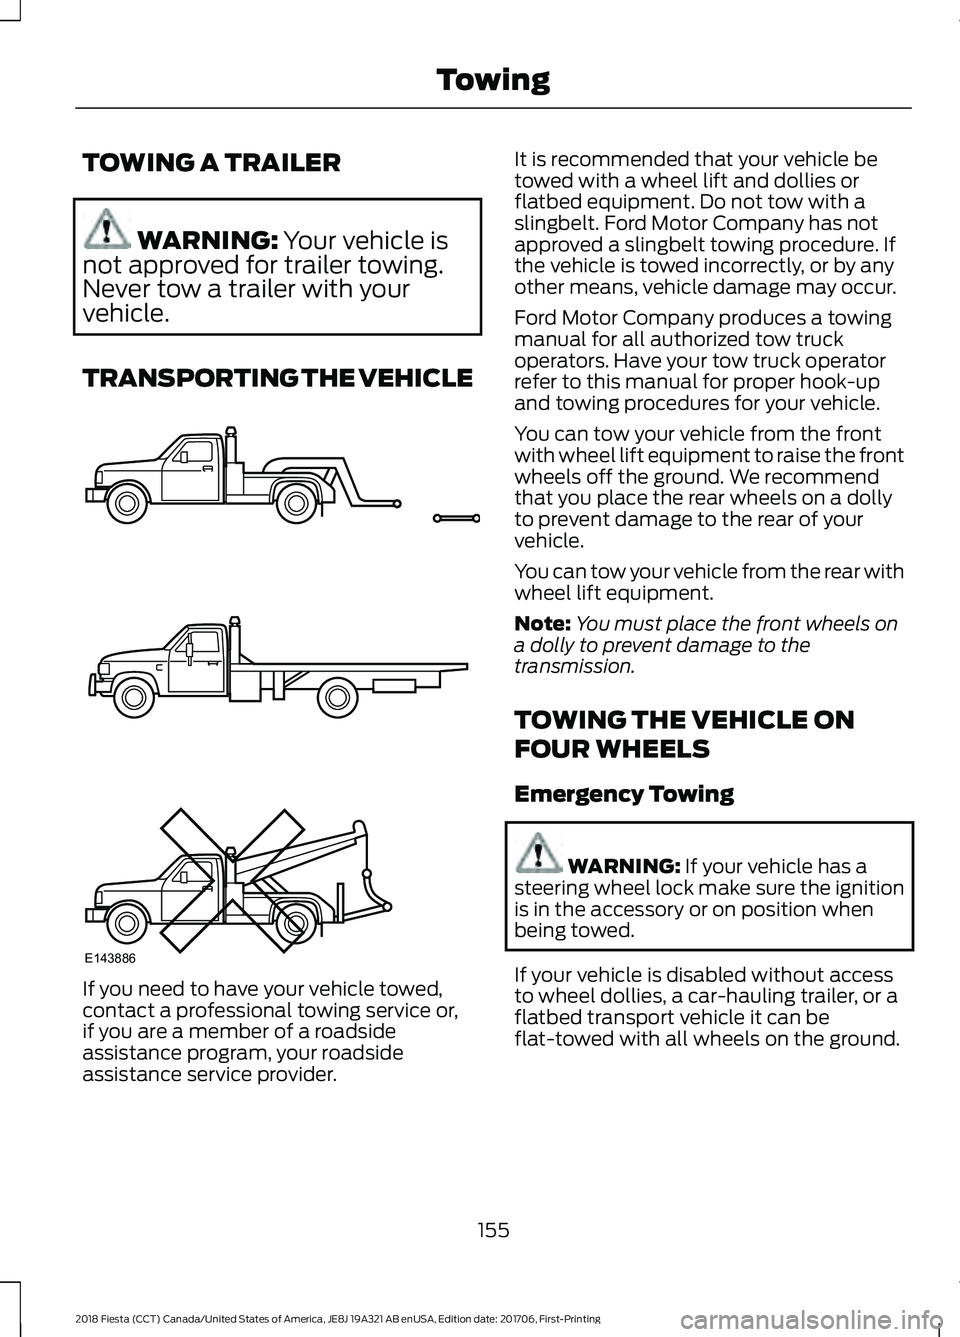 FORD FIESTA 2018  Owners Manual TOWING A TRAILER
WARNING: Your vehicle is
not approved for trailer towing.
Never tow a trailer with your
vehicle.
TRANSPORTING THE VEHICLE If you need to have your vehicle towed,
contact a professiona